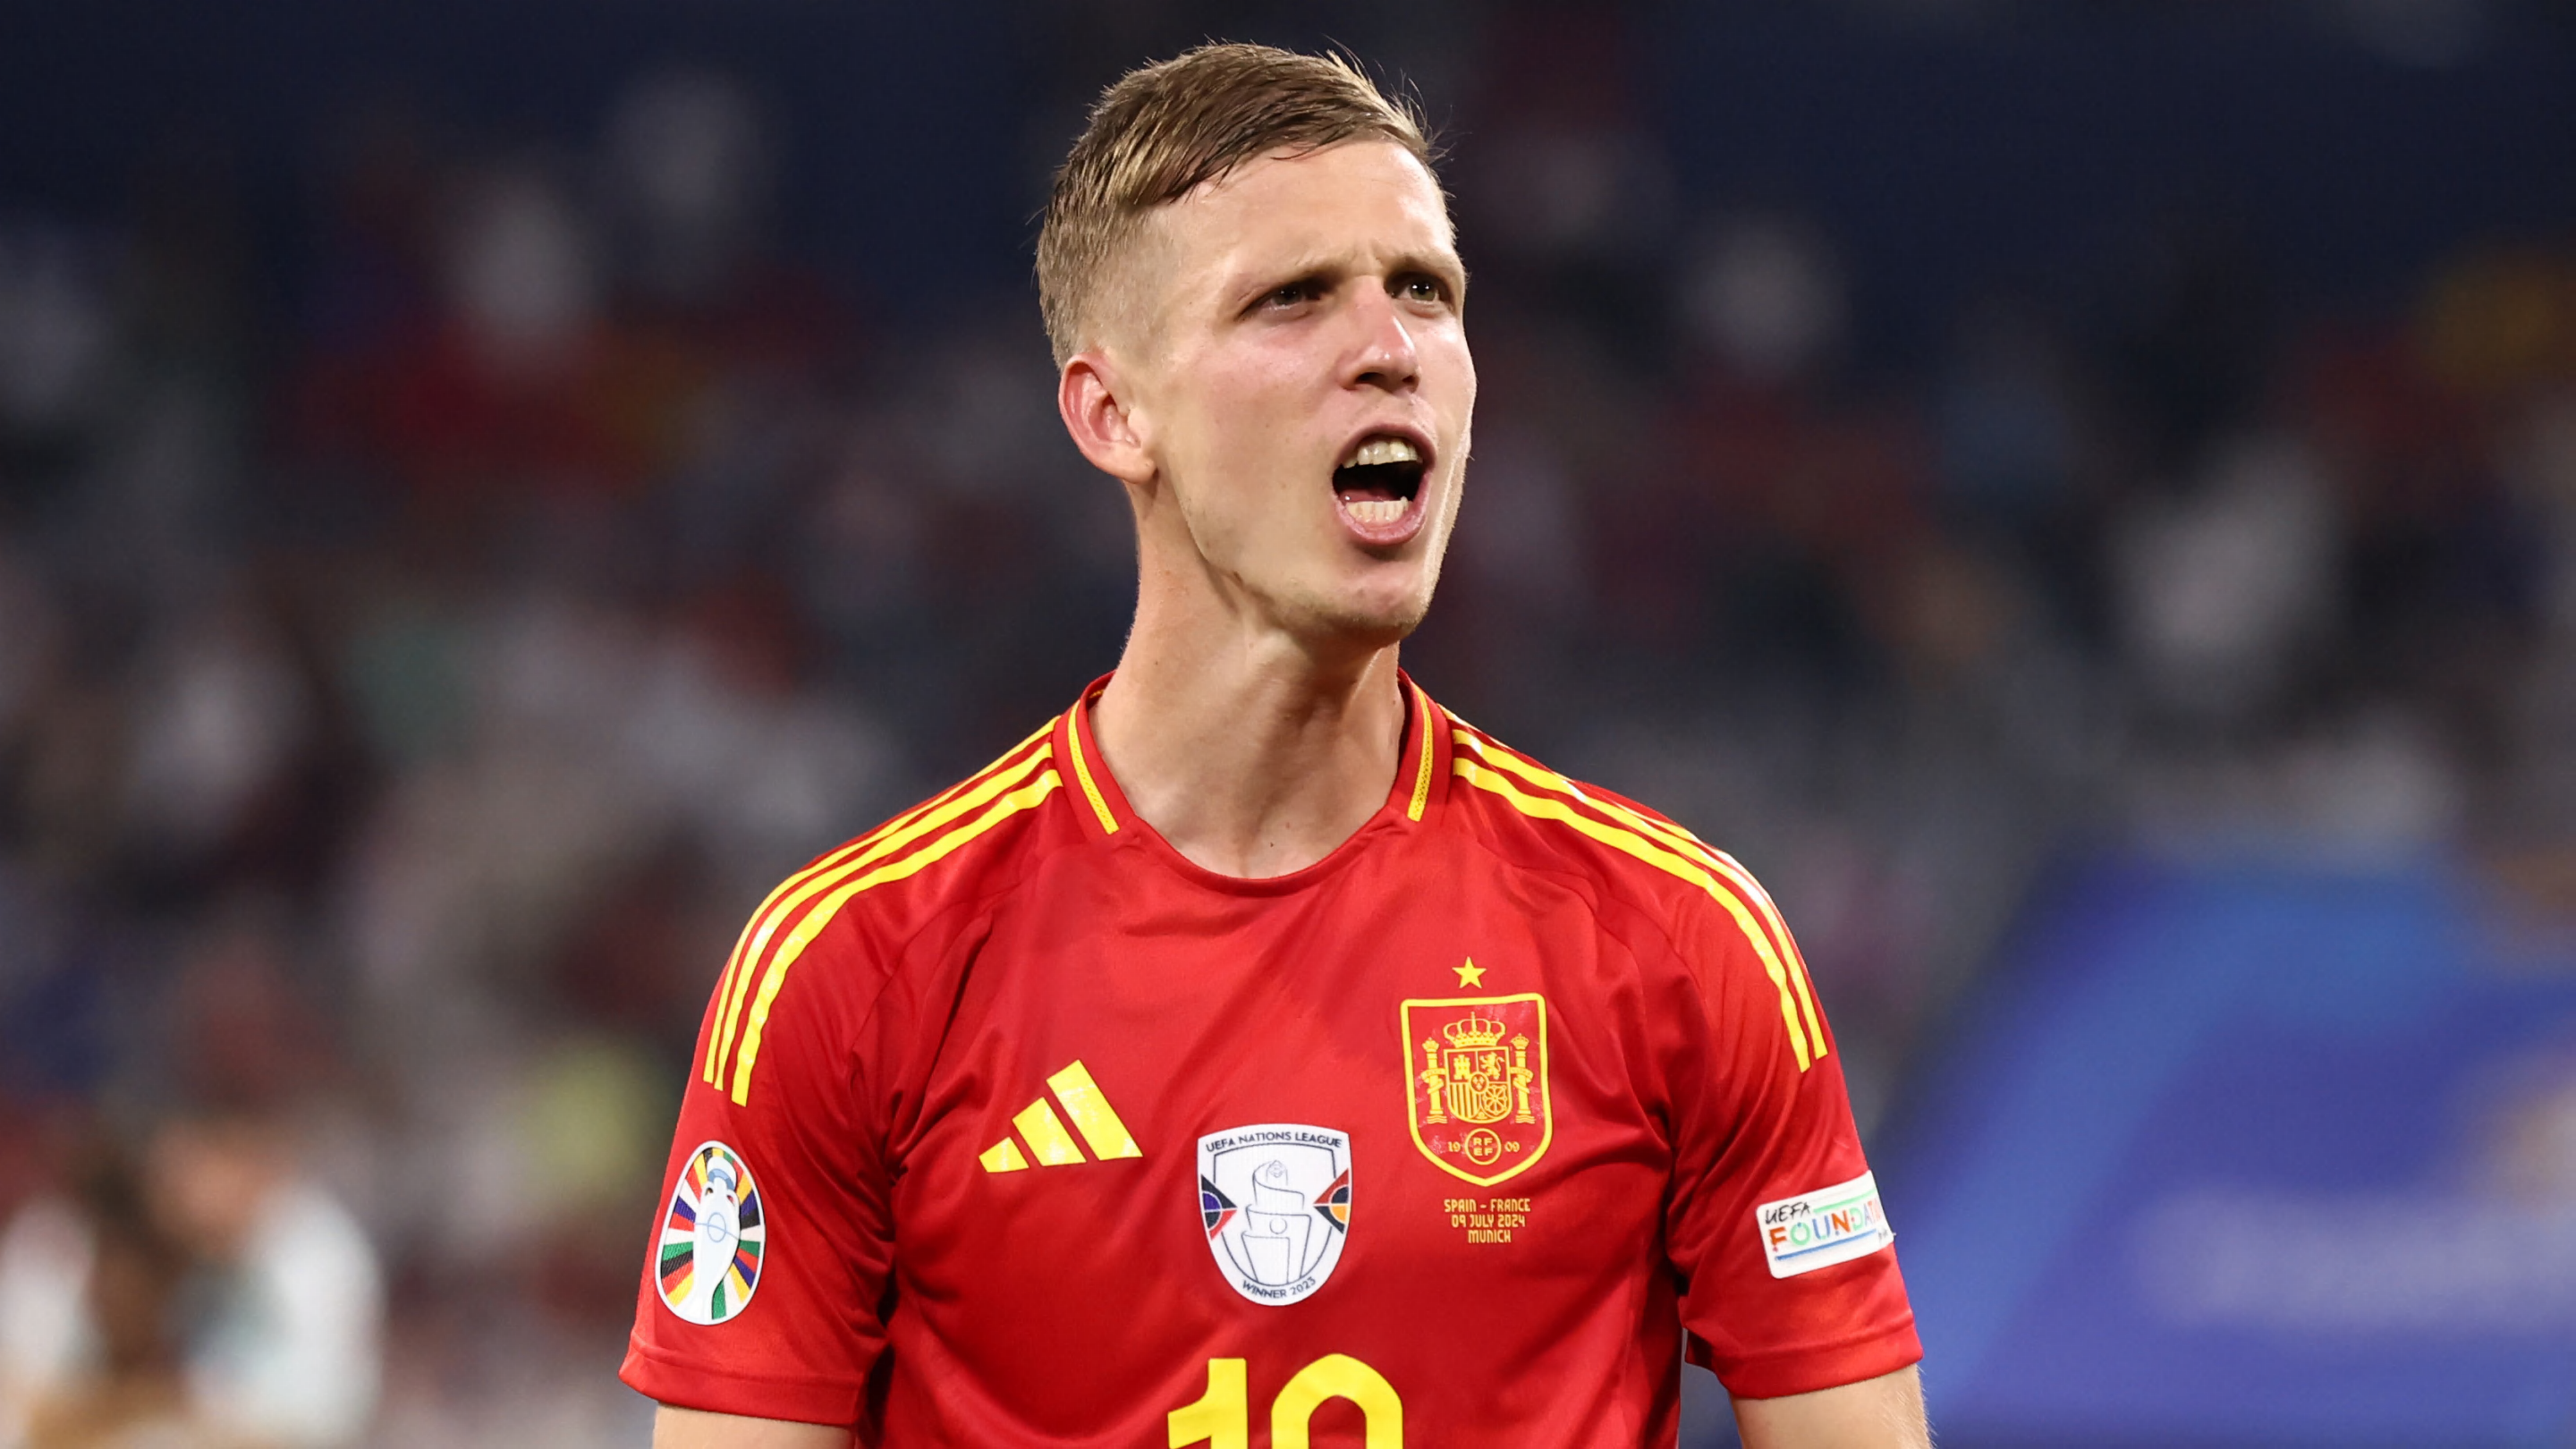 Barcelona's first offer for Man City target Dani Olmo rejected - report